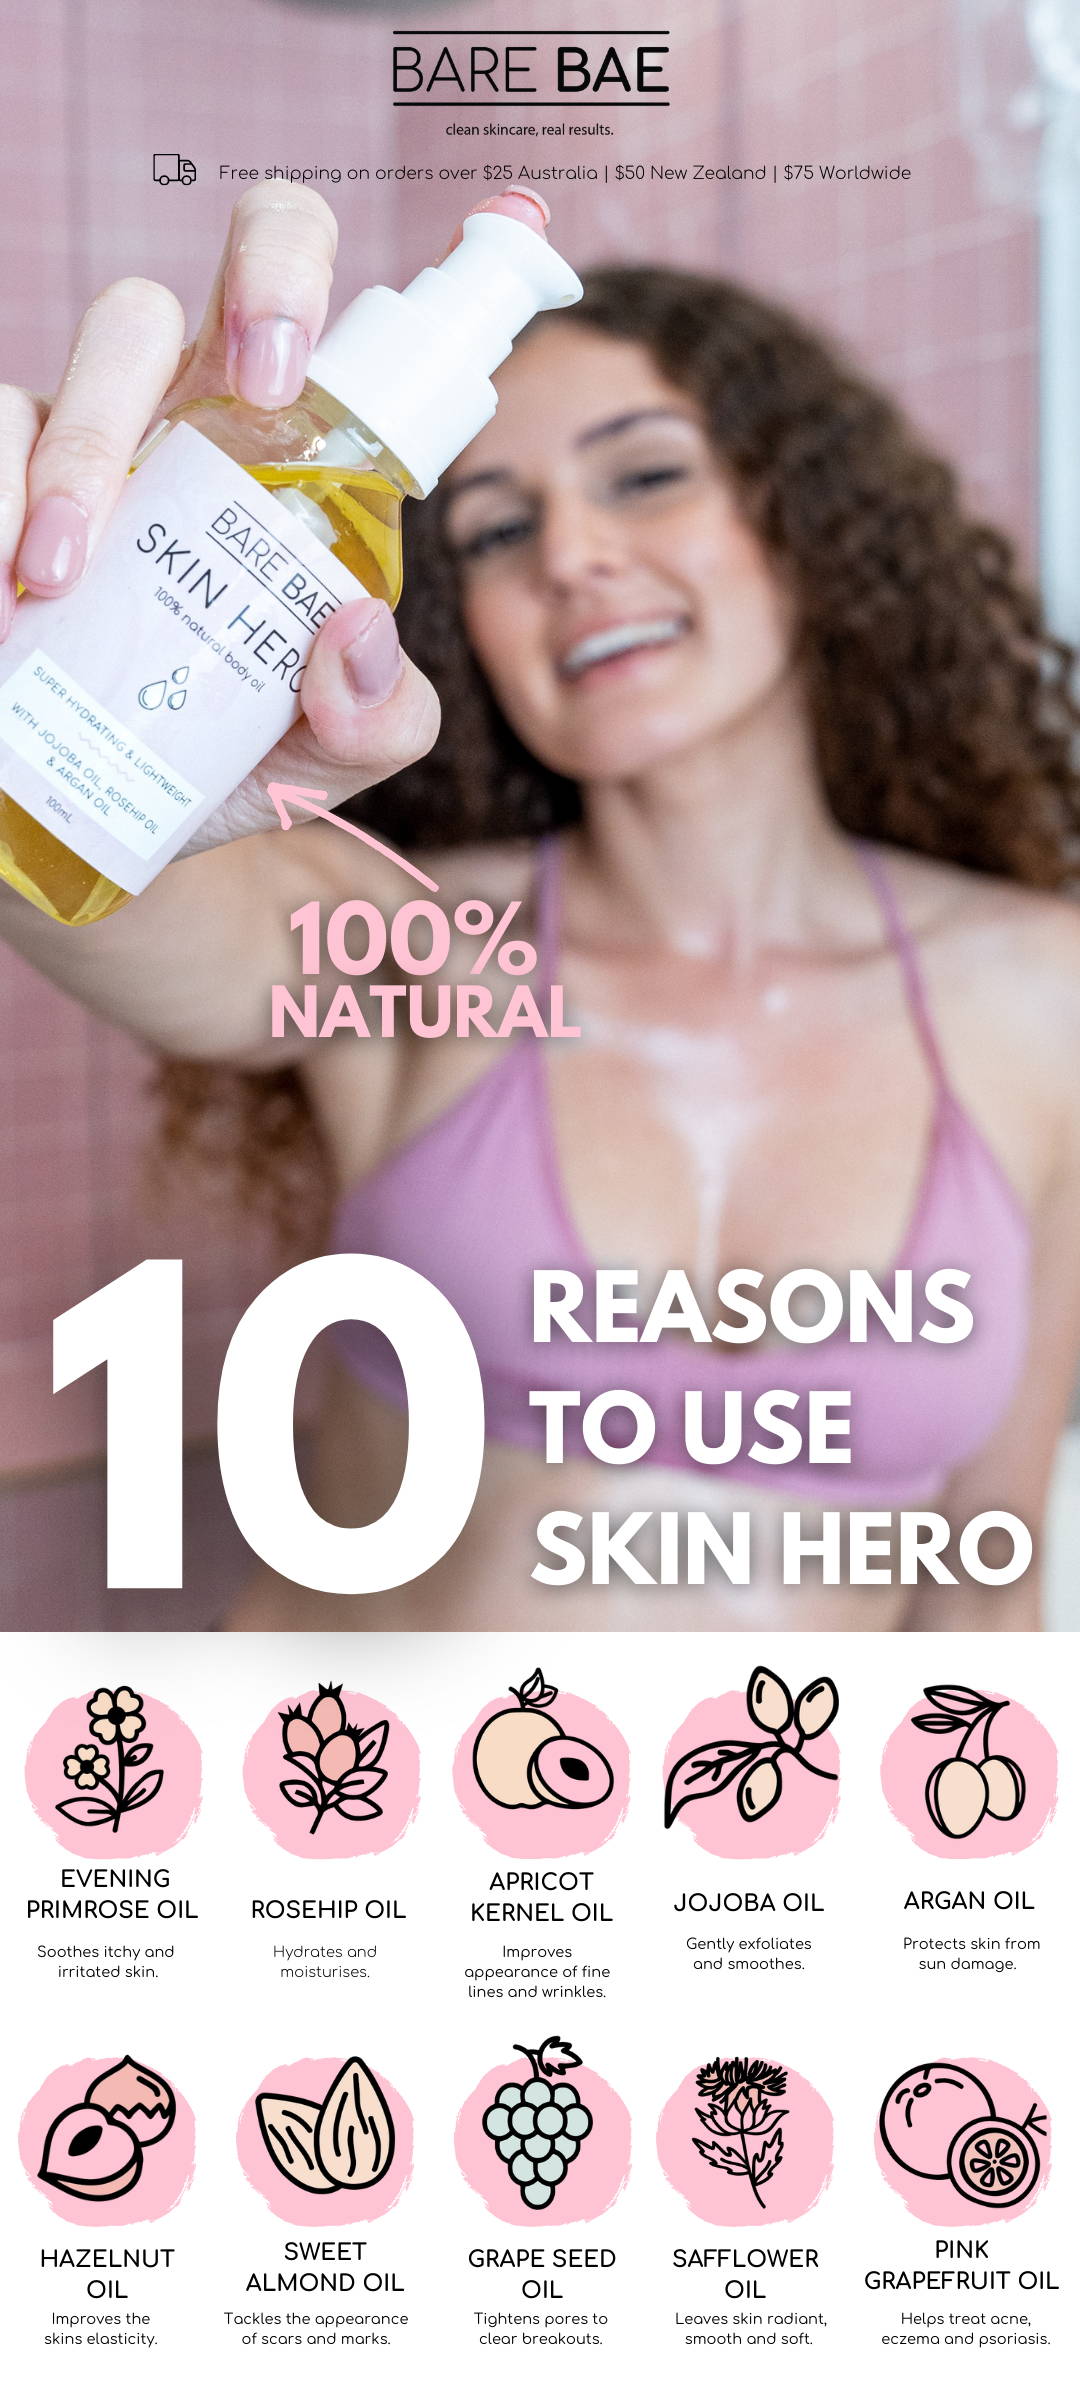 Bare Bae's Skin Hero is a powerful lightweight facial & body oil that deeply hydrates, soothes, revitalises and completely protects your skin against the elements. It's your daily skin booster and new best friend. A 100% natural super-hydrating & lightweight face & body oil that isn't afraid to tackle your dry bits and flaky skin. Plant-based, uncomplicated, effective skin care by Bare Bae.